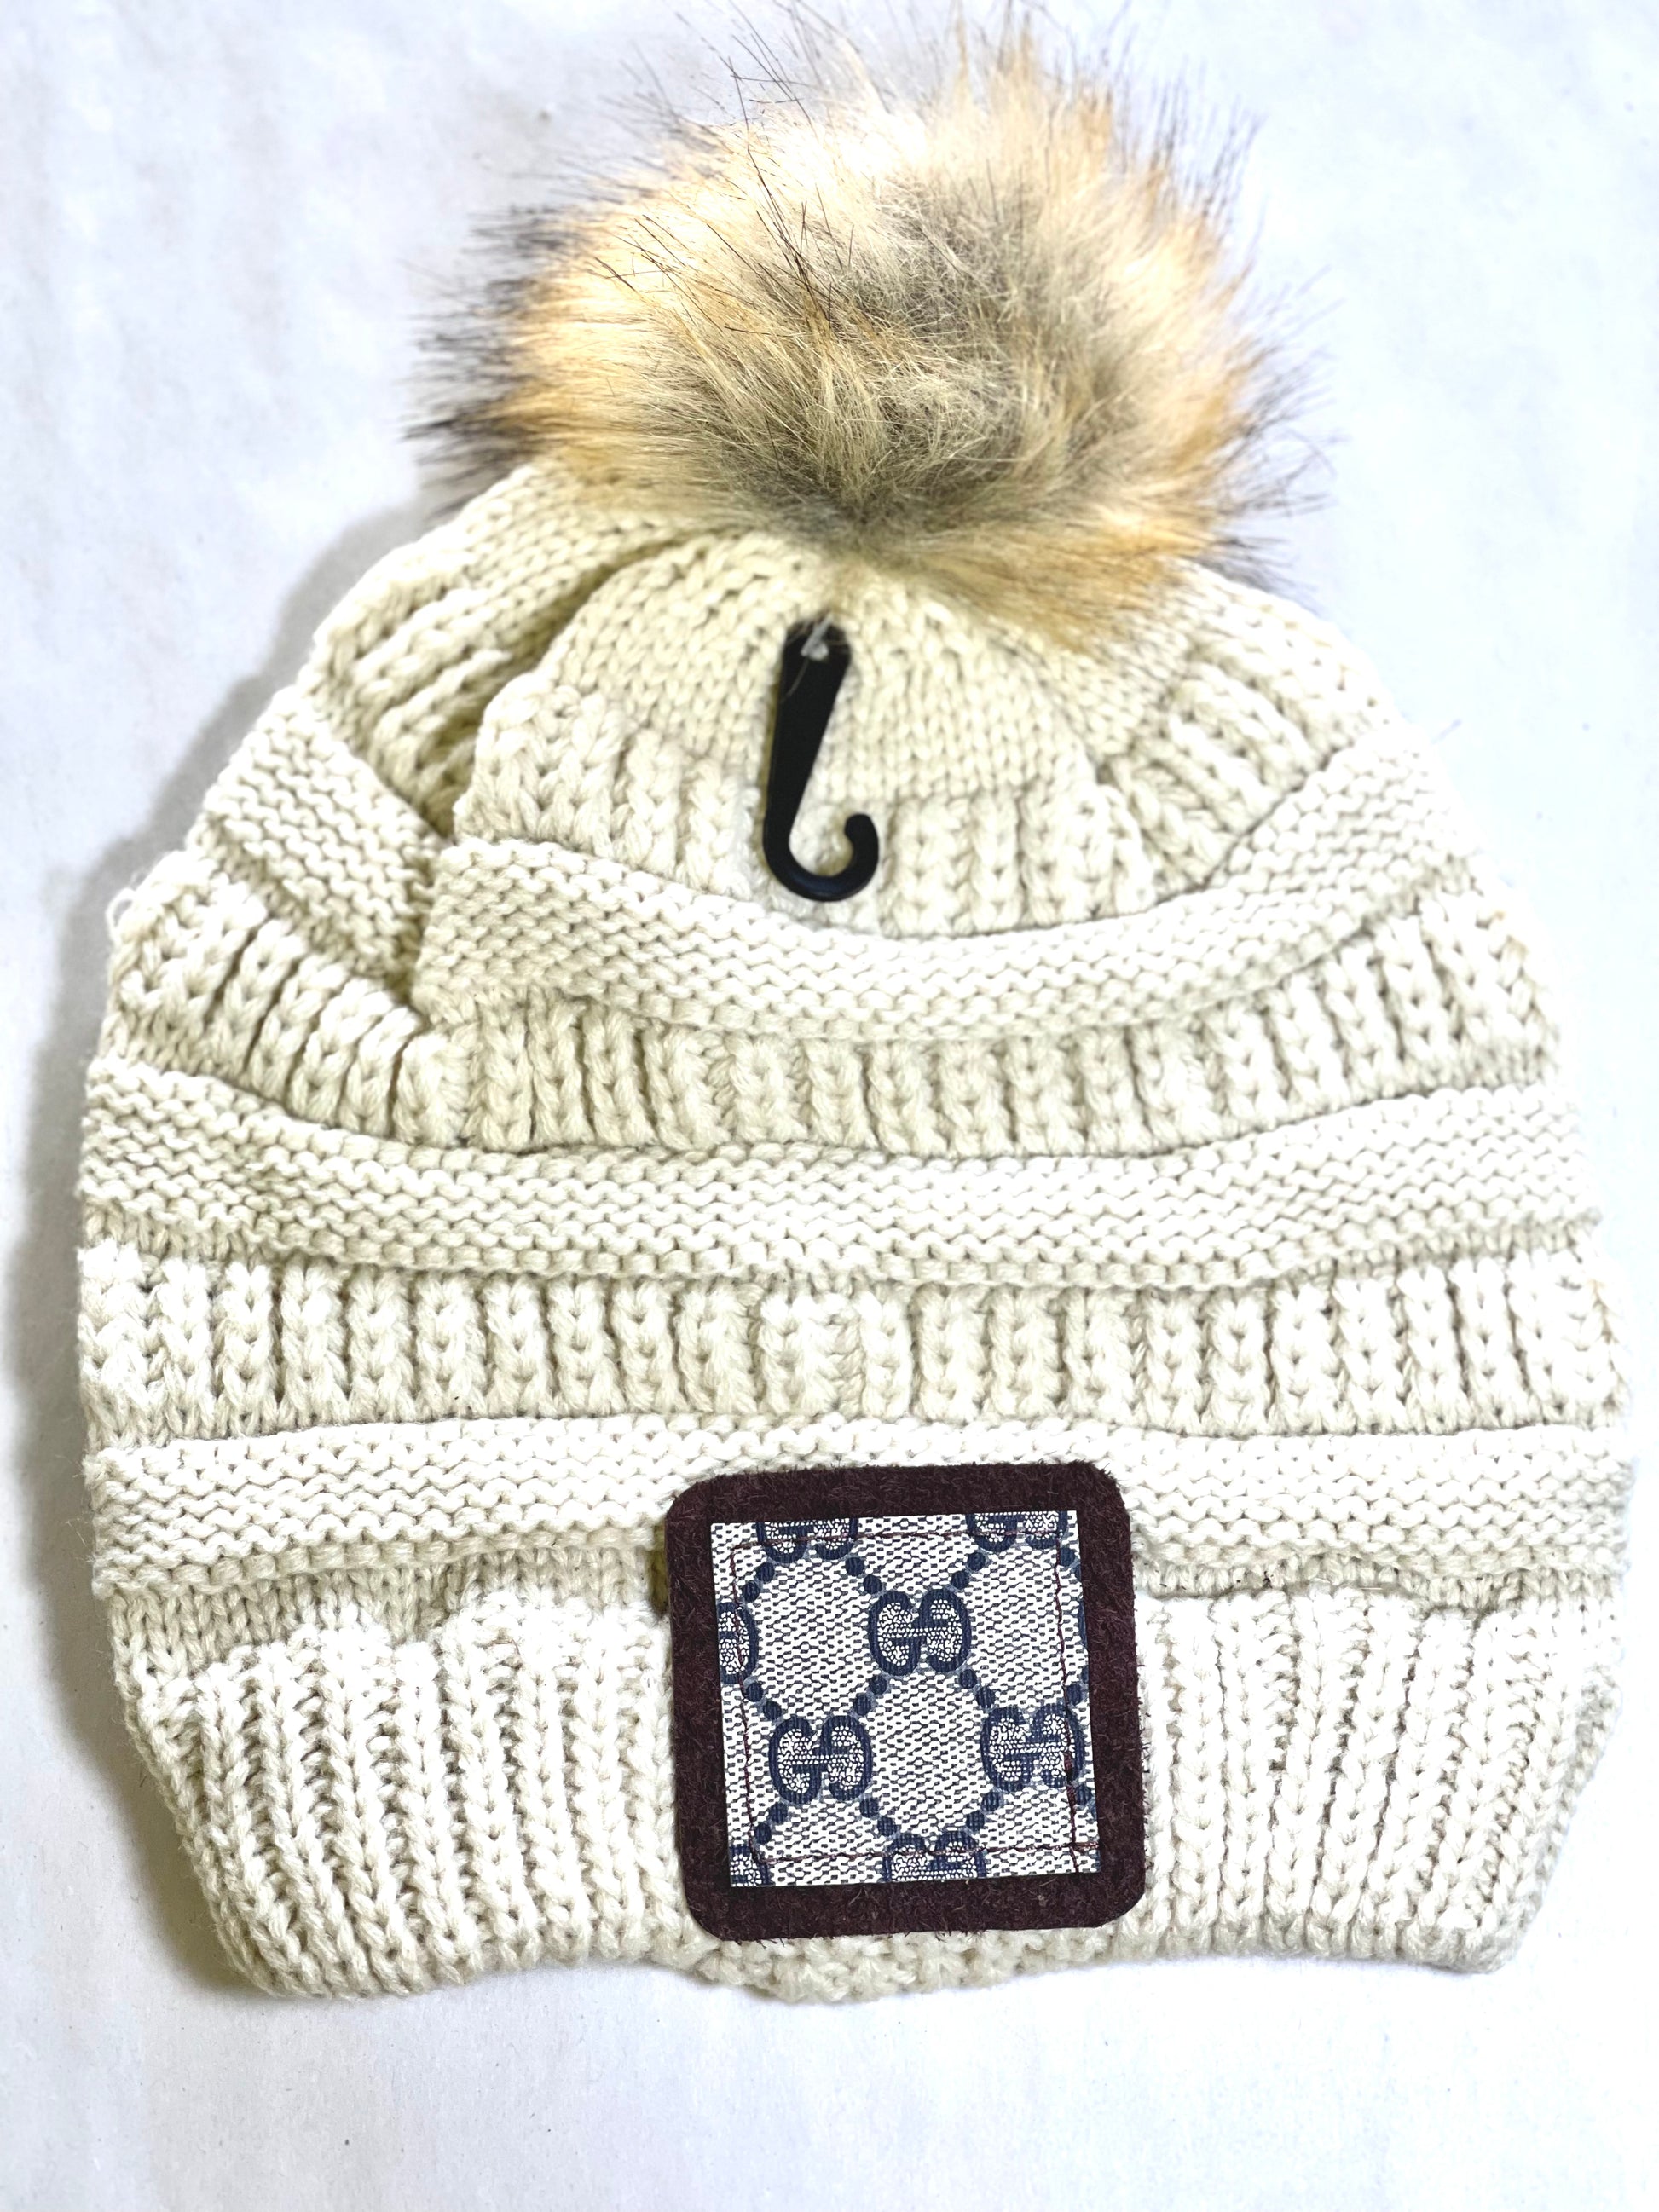 Beanie with Gg patch and antique hardware - Patches Of Upcycling